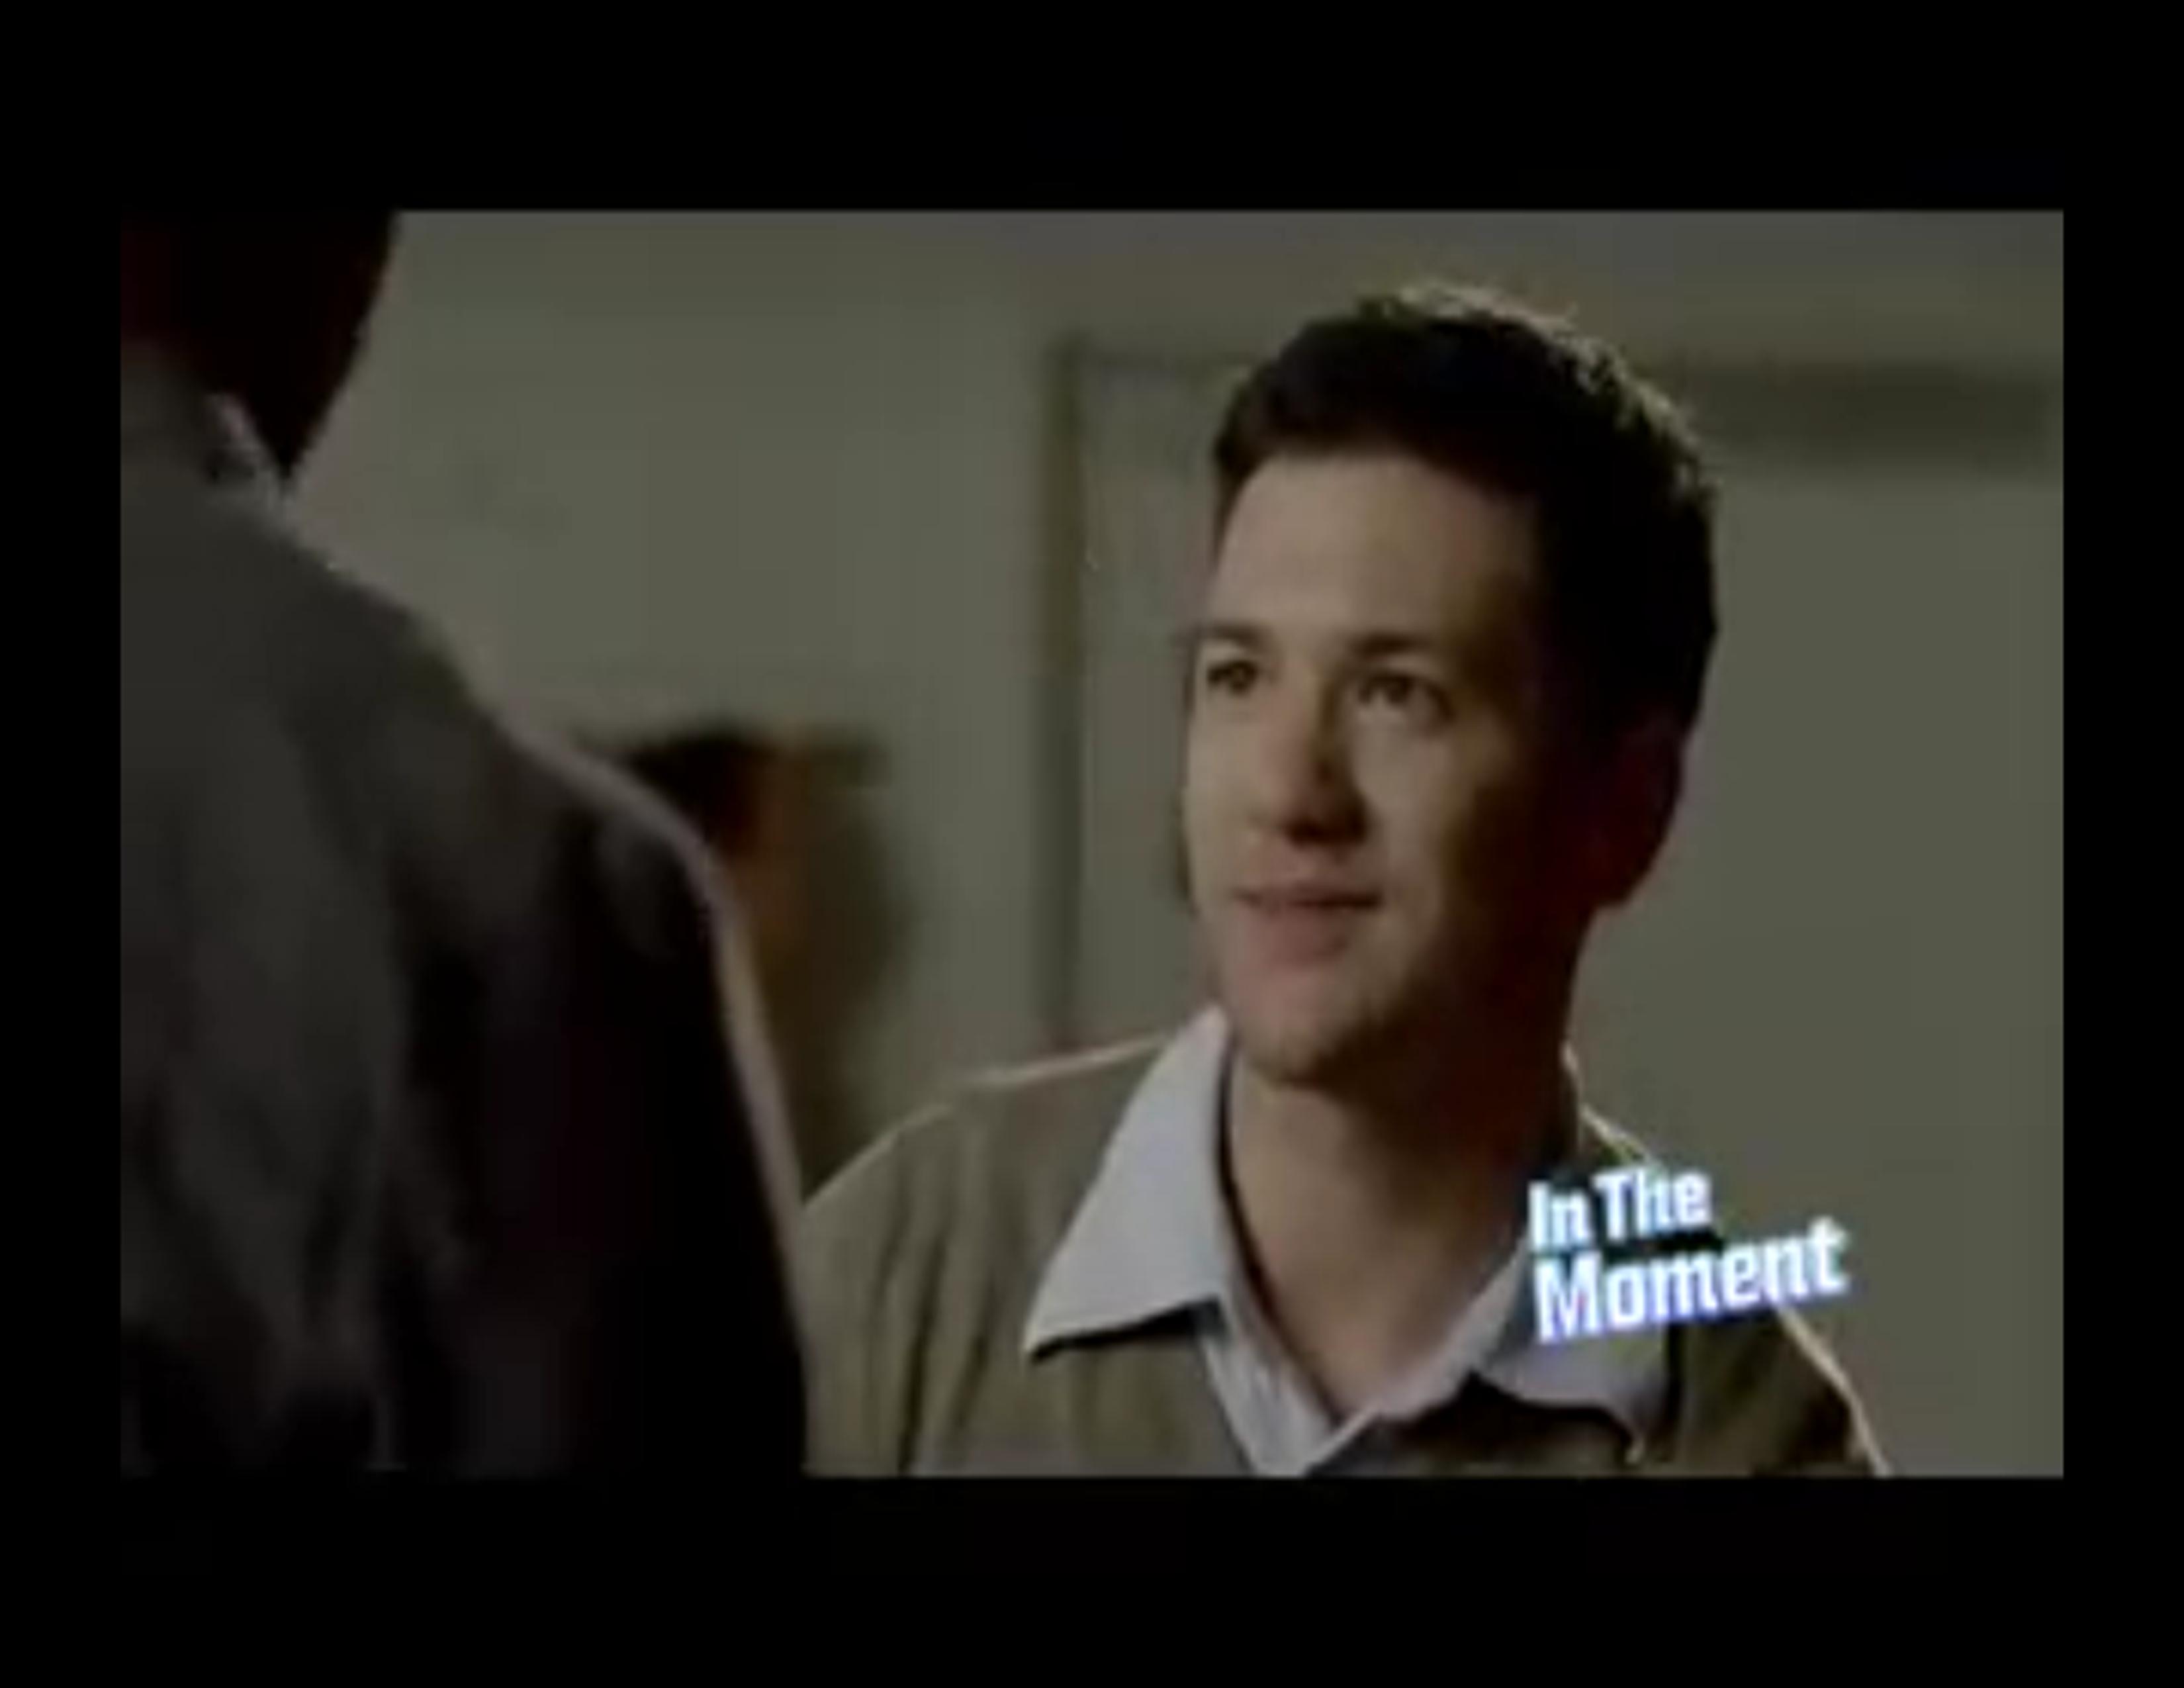 As Eric on In The Moment